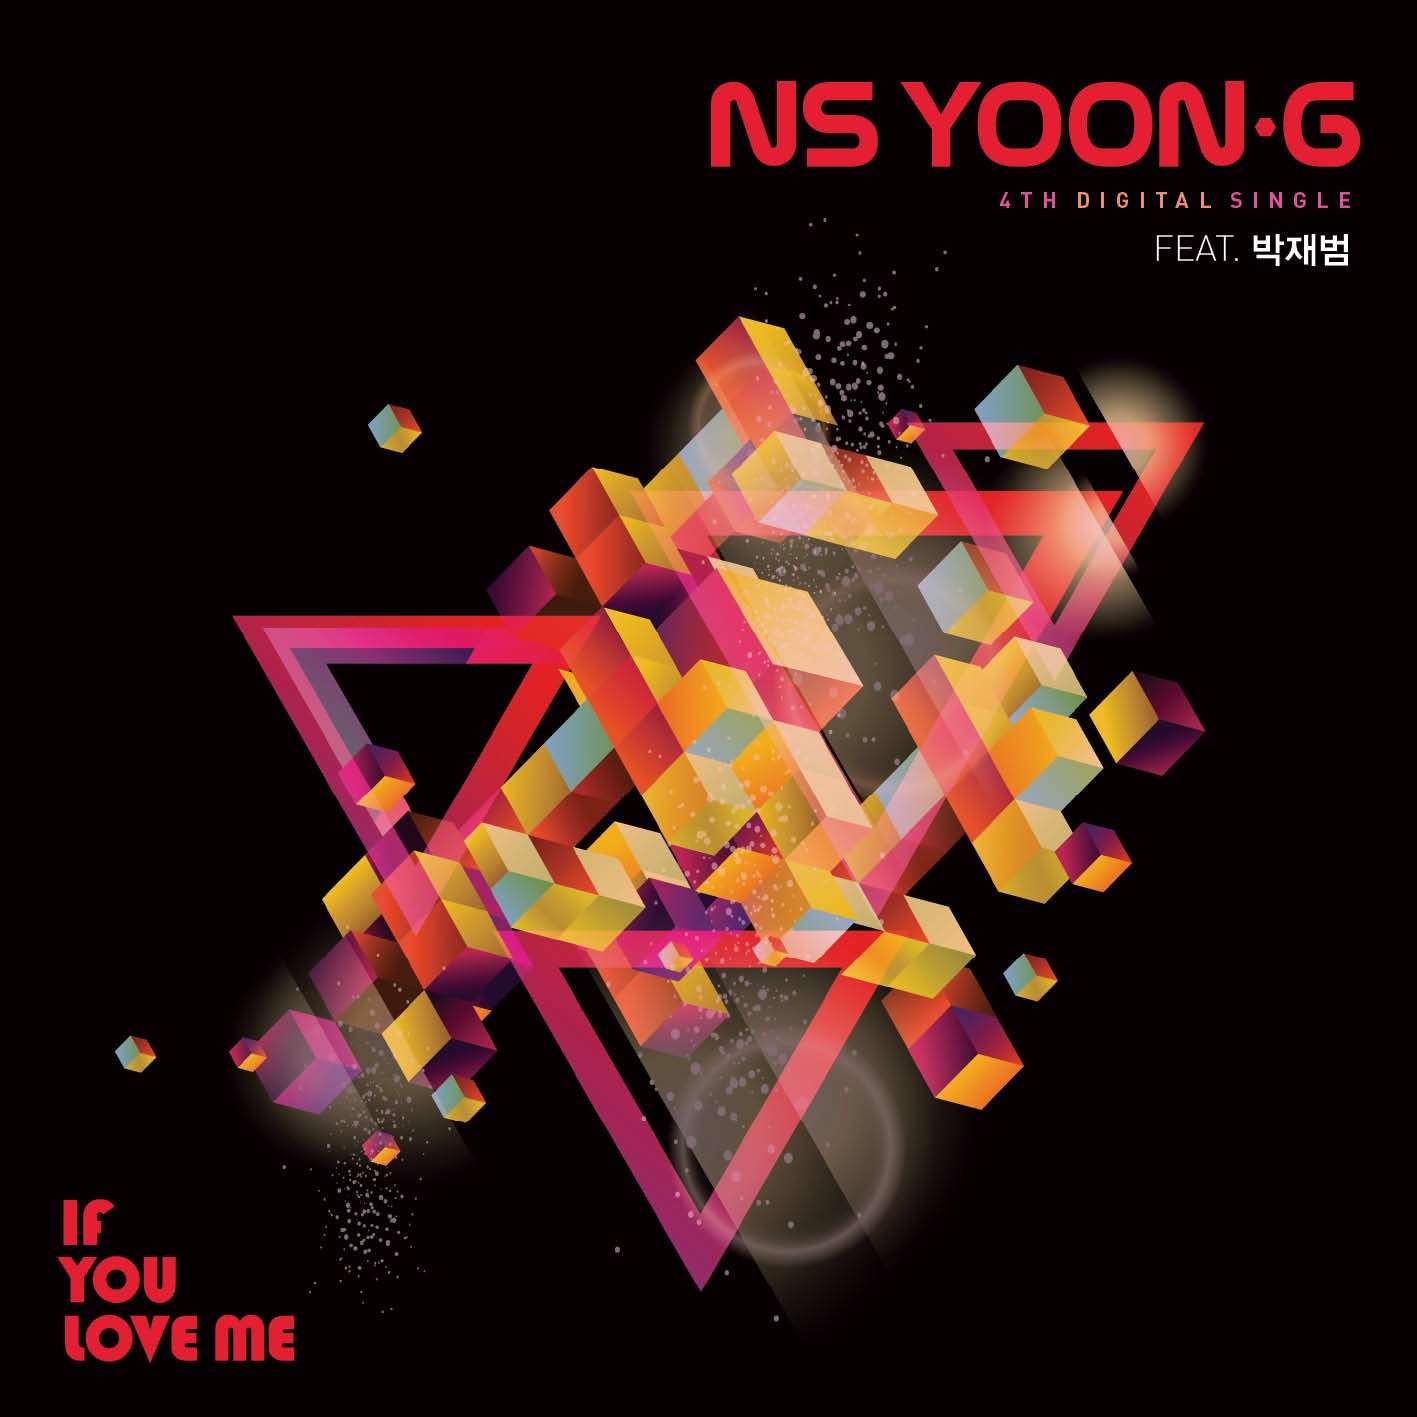 Download [Single] NS Yoon-G – If You Love Me (feat. Jay Park)1417 x 1417